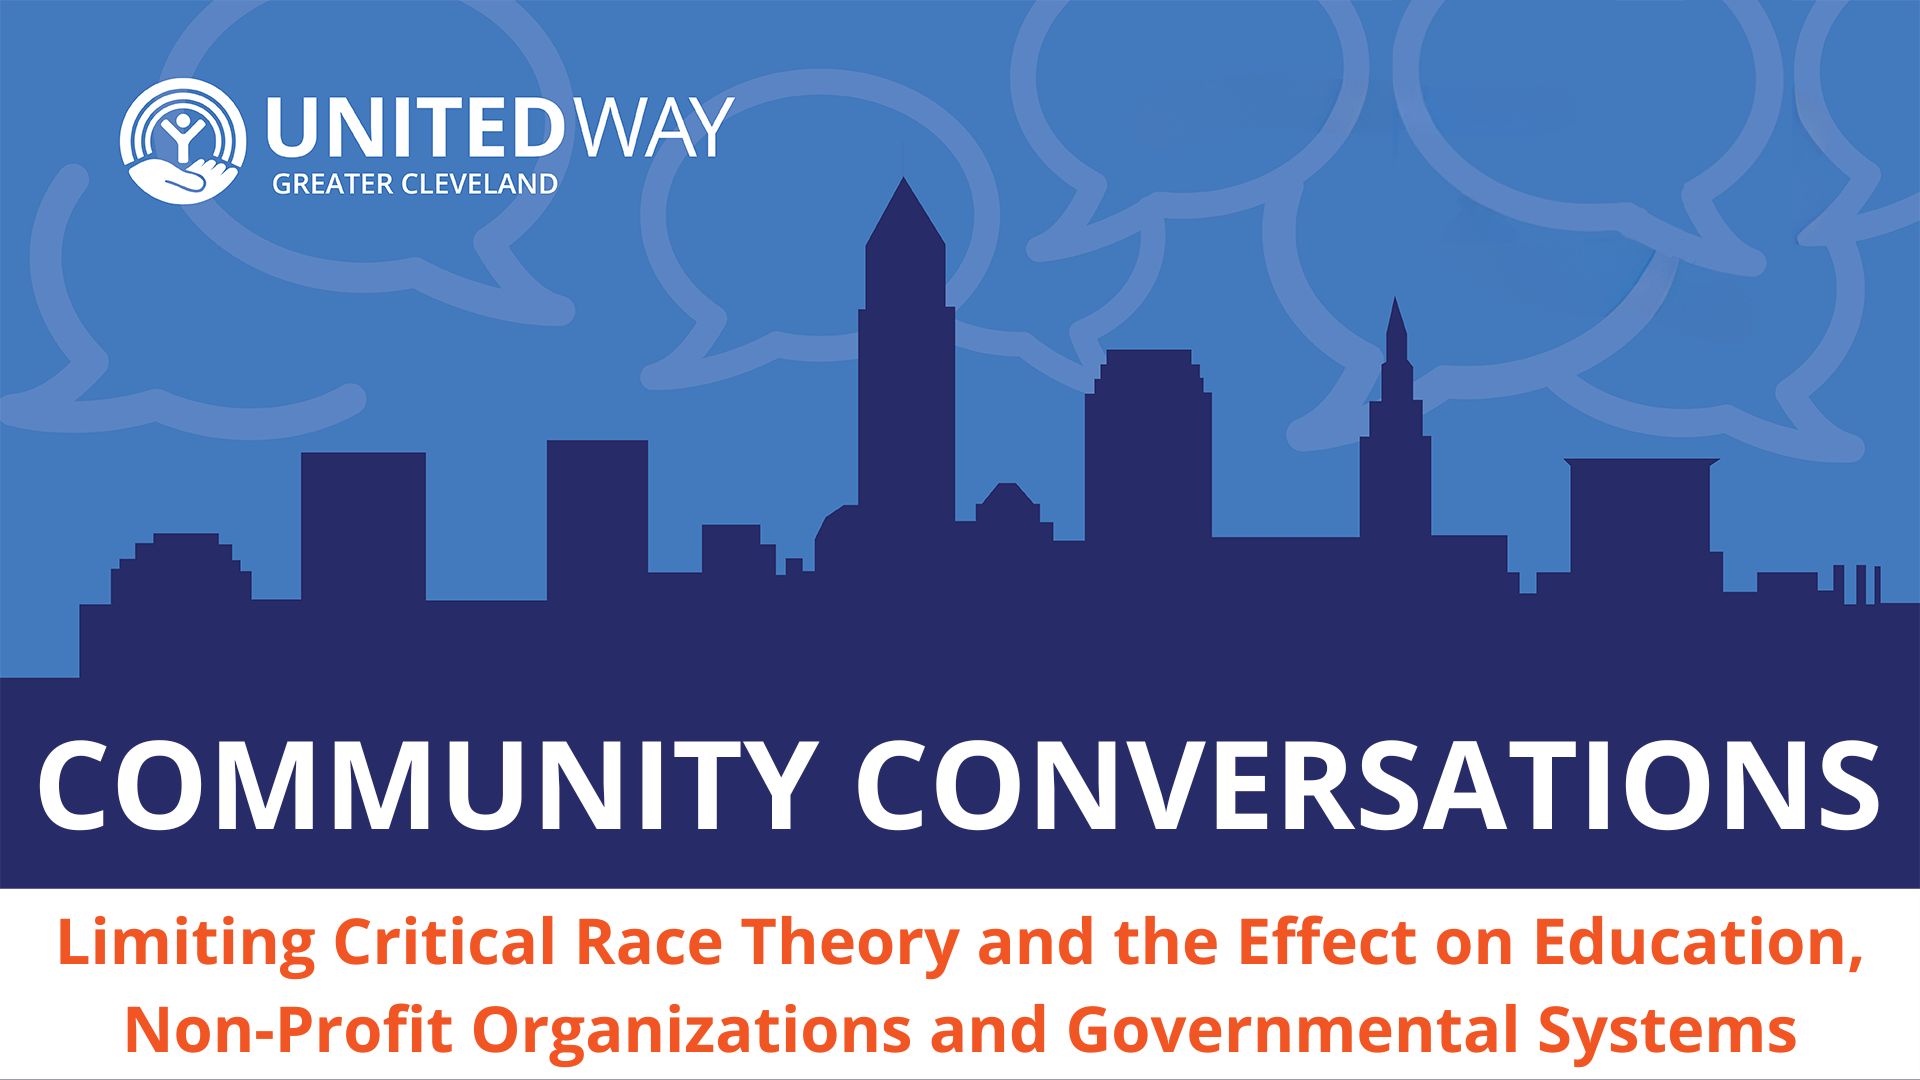 Limiting Critical Race Theory and the Effect on Education, Non-Profit Organizations and Governmental Systems